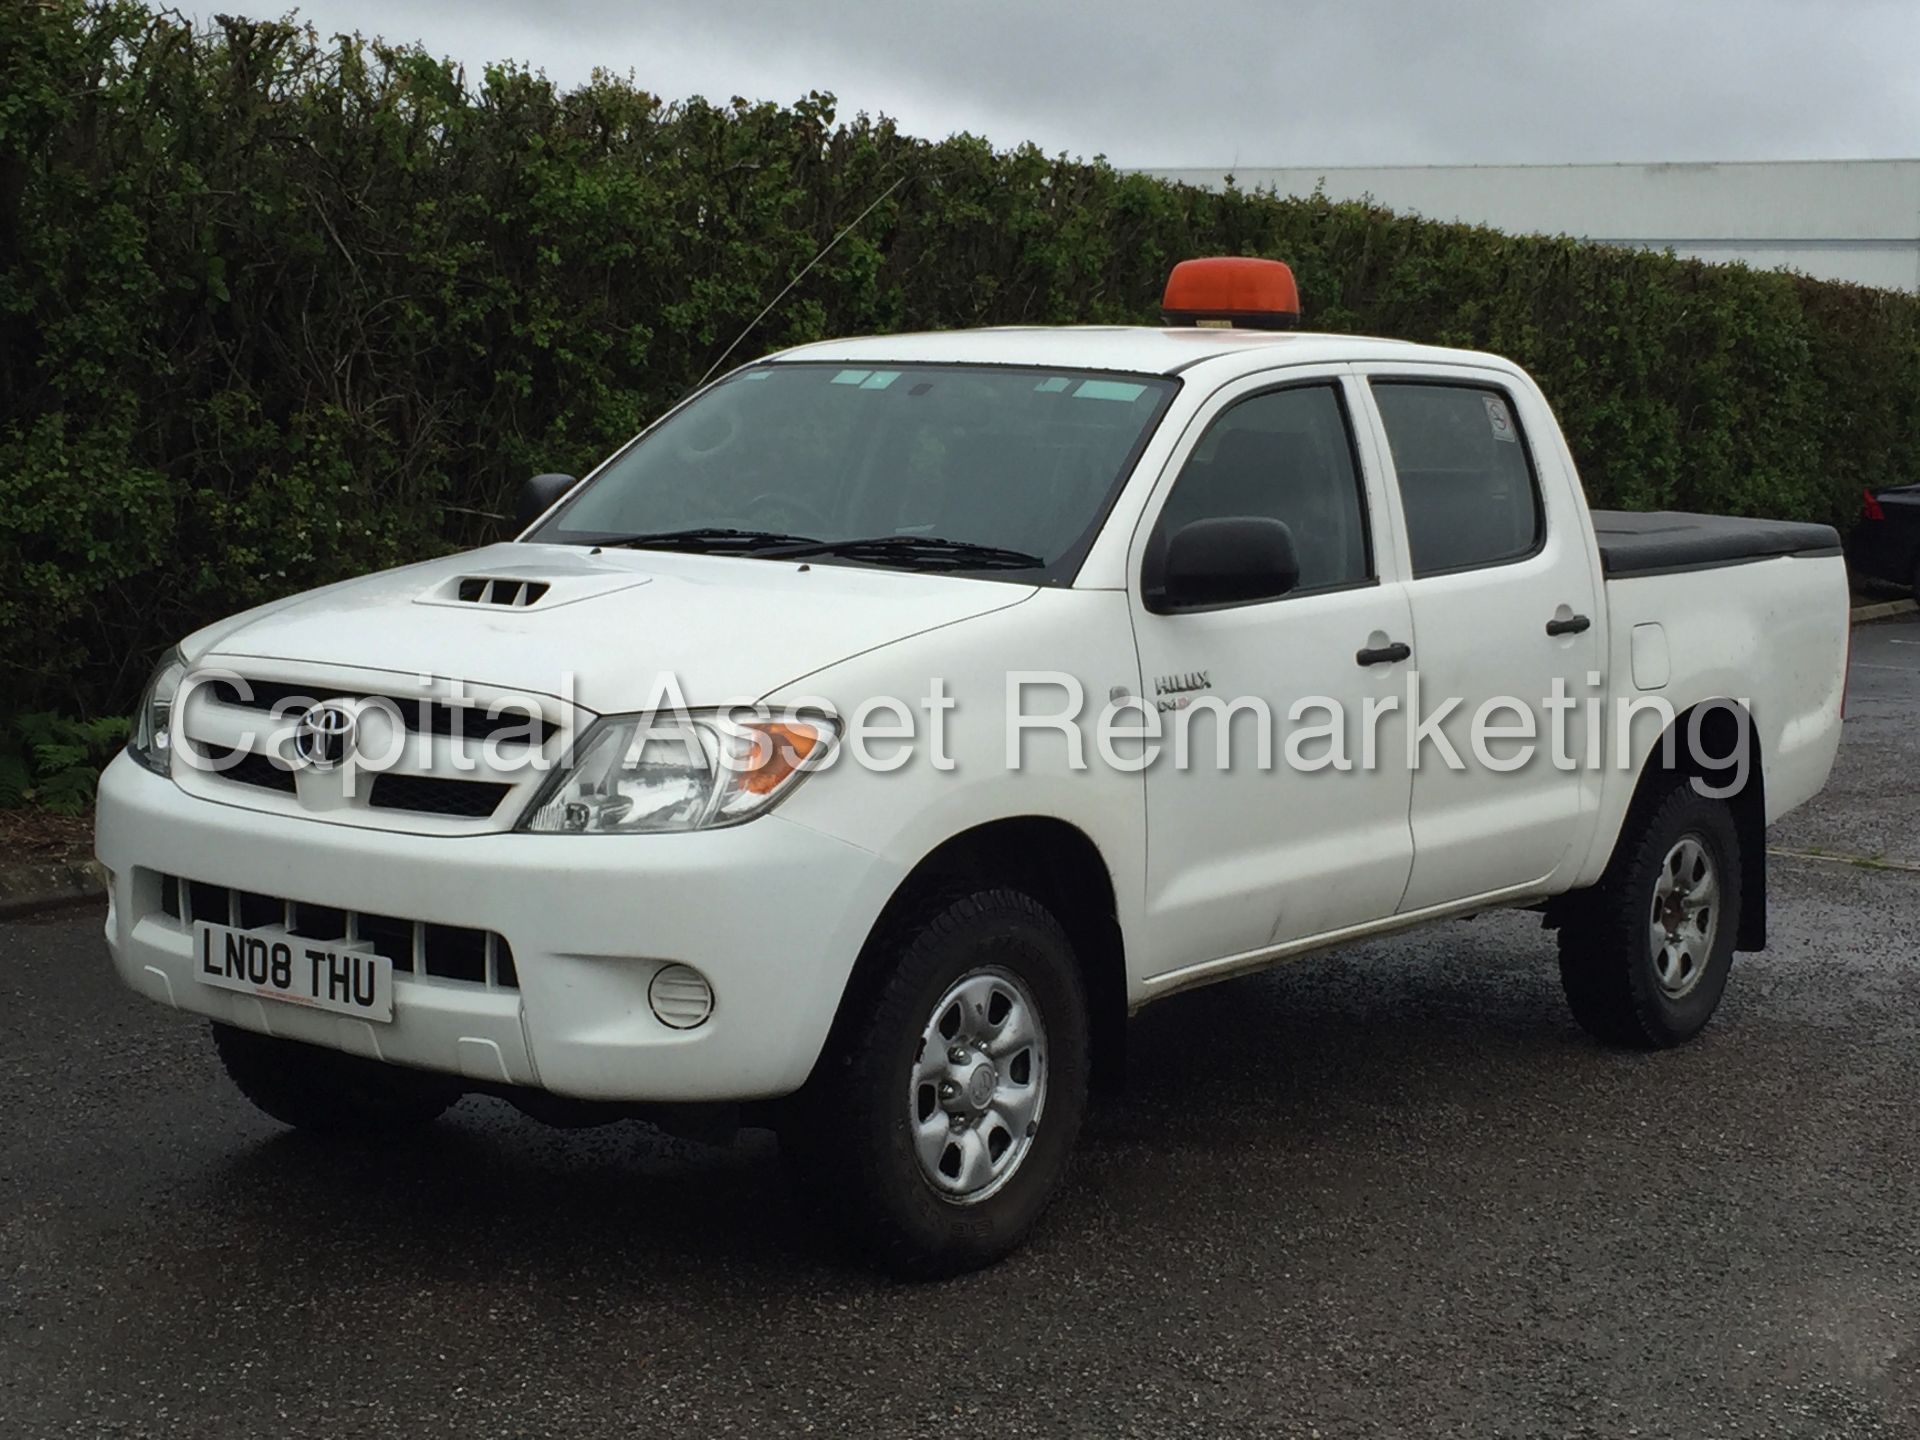 TOYOTA HILUX D-4D '171 BHP' (2008 - 08 REG) DOUBLE CAB PICK-UP (1 OWNER FROM NEW) - Image 2 of 23